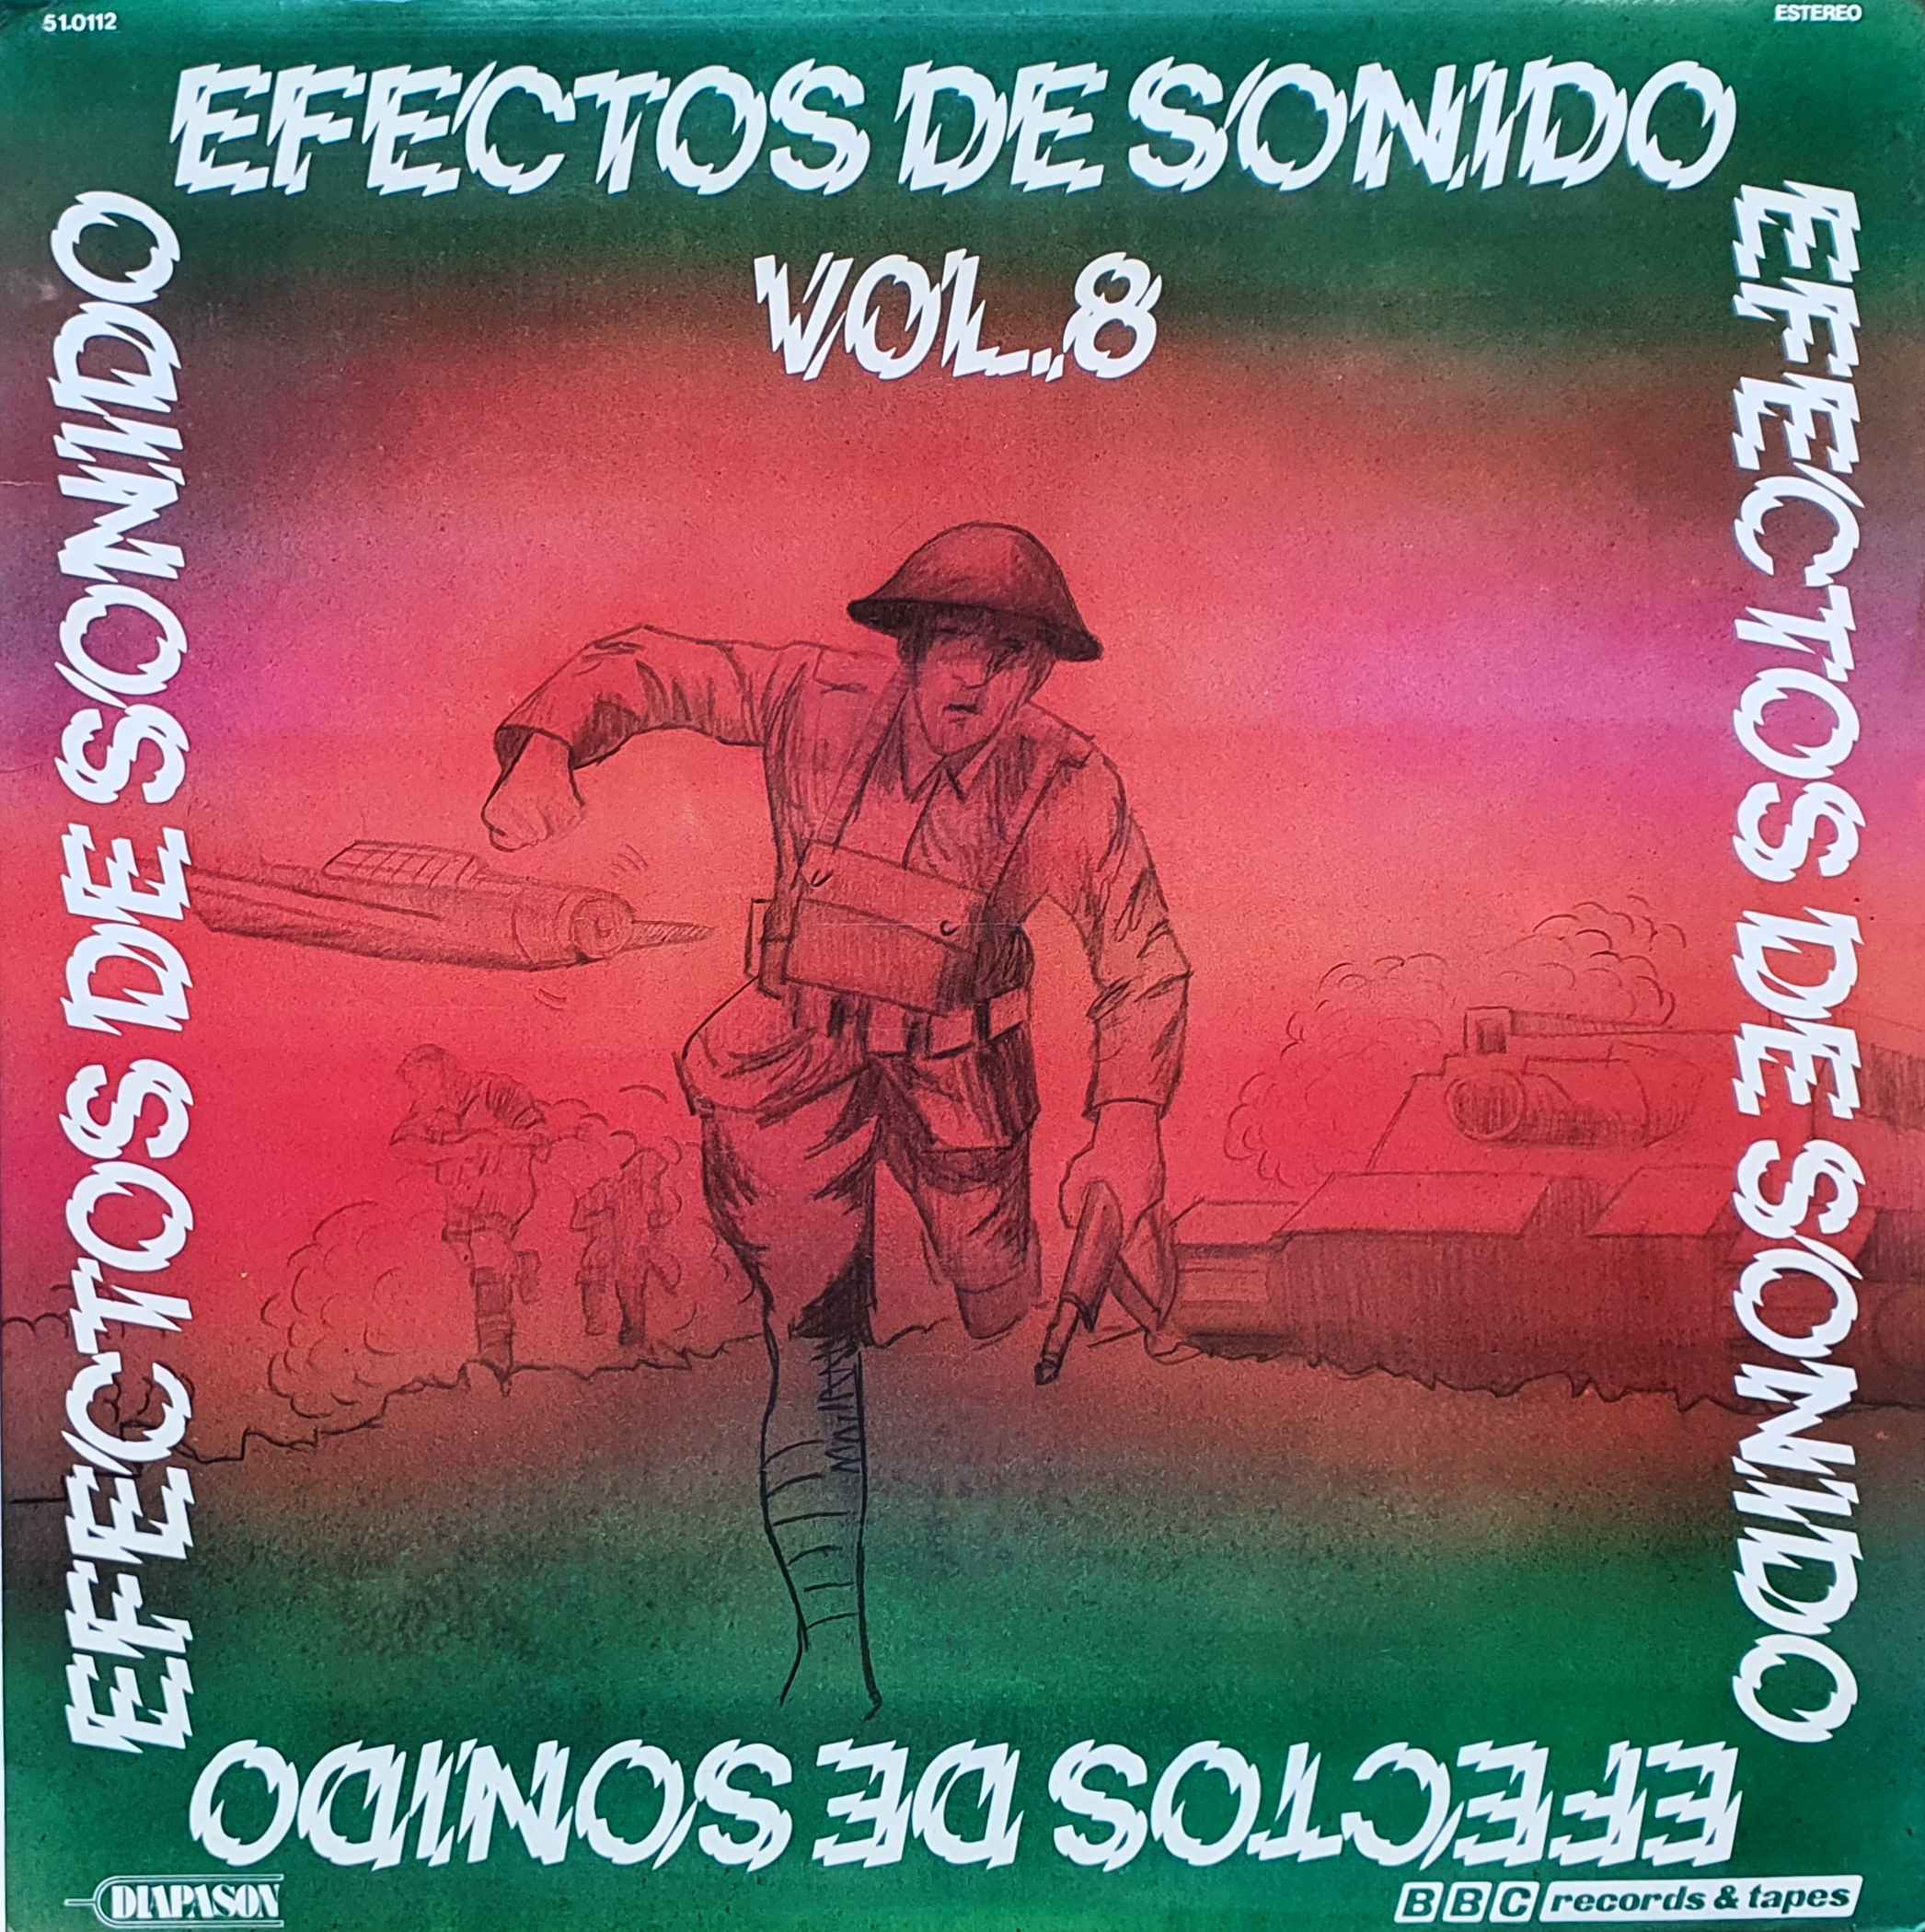 Picture of Efectos de sonido No 8 by artist Various from the BBC albums - Records and Tapes library